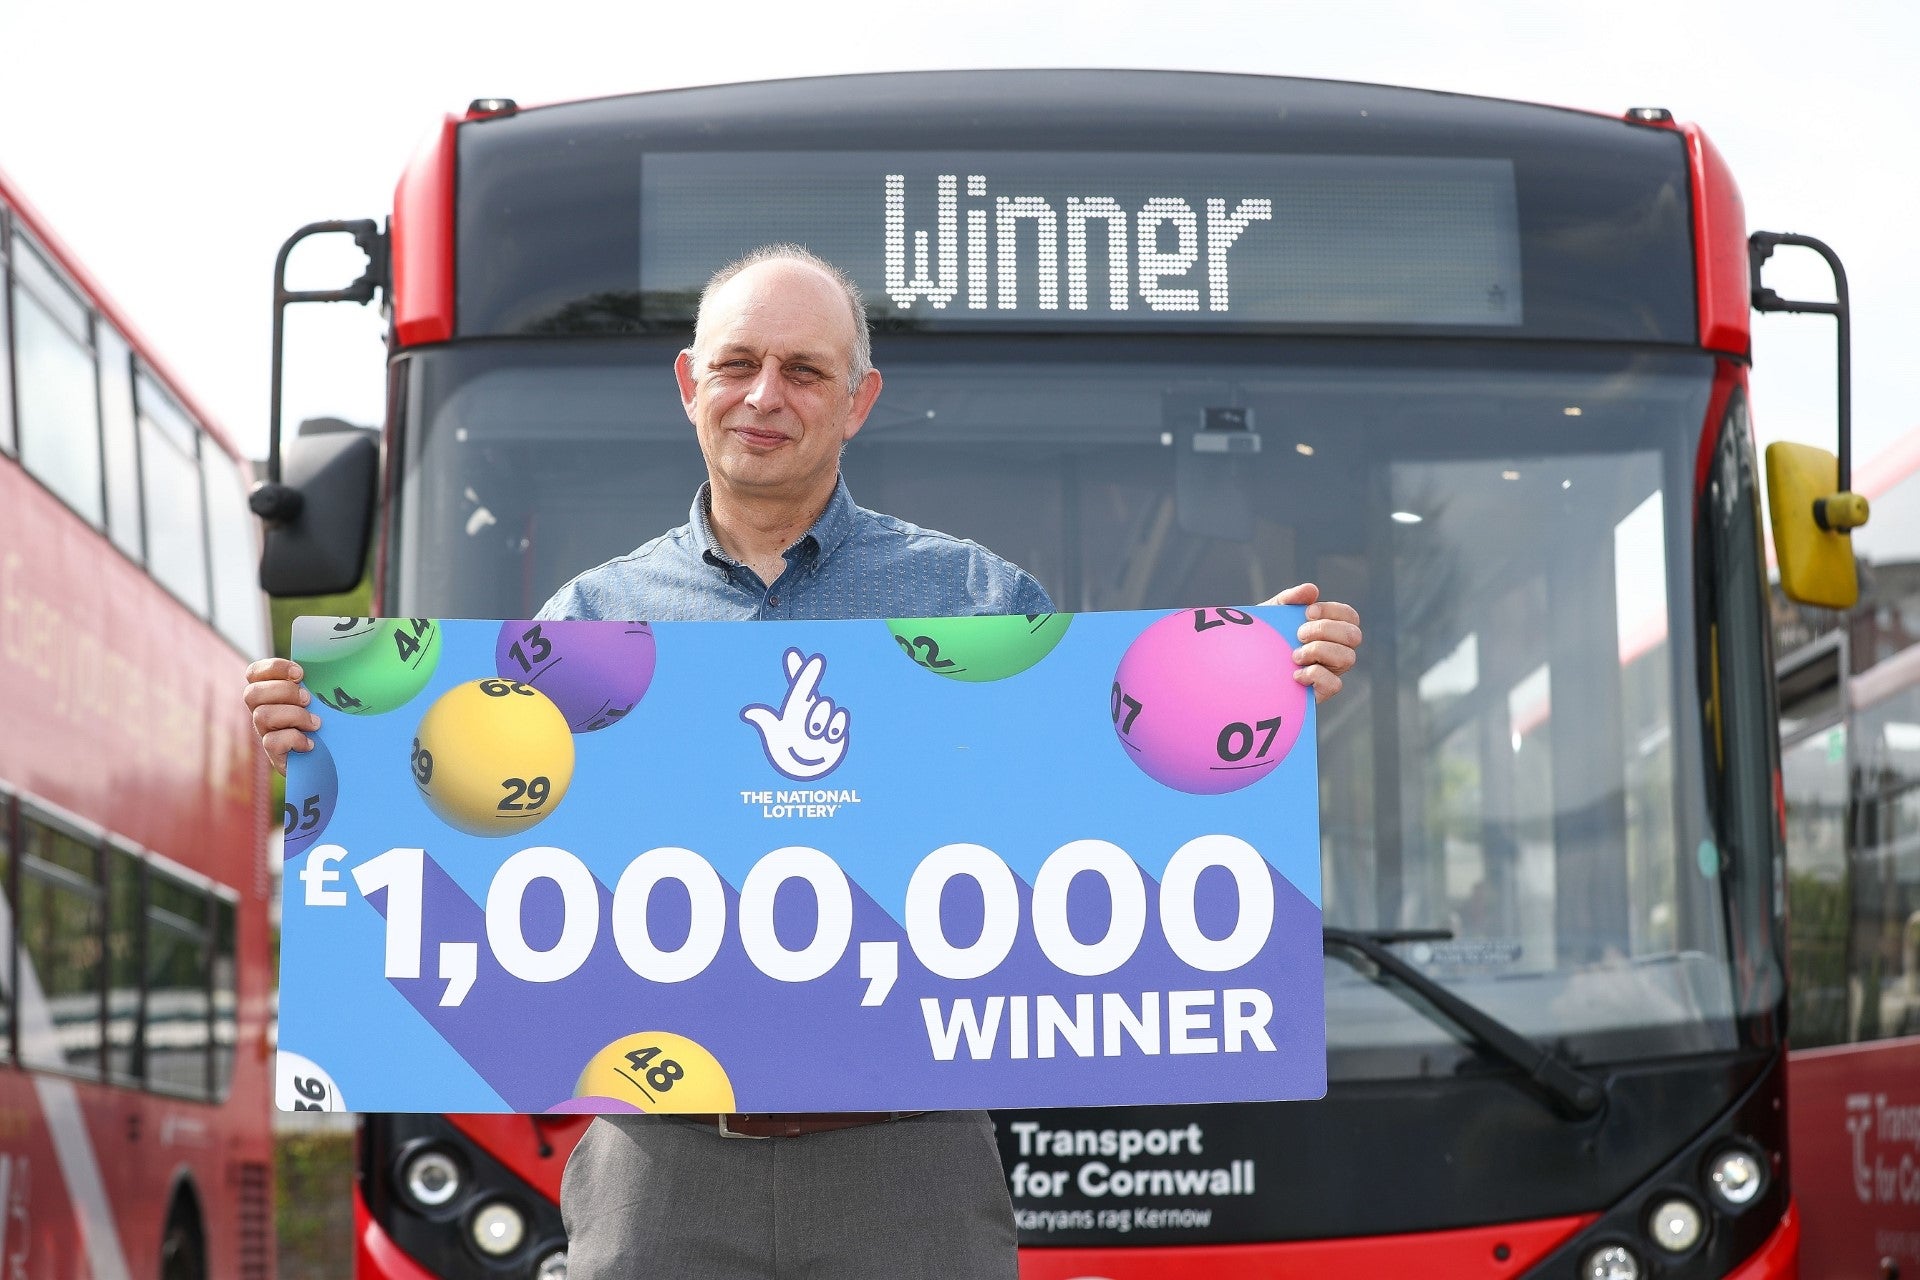 Bus driver wins £1m on lottery scratchcard while waiting for doner kebab